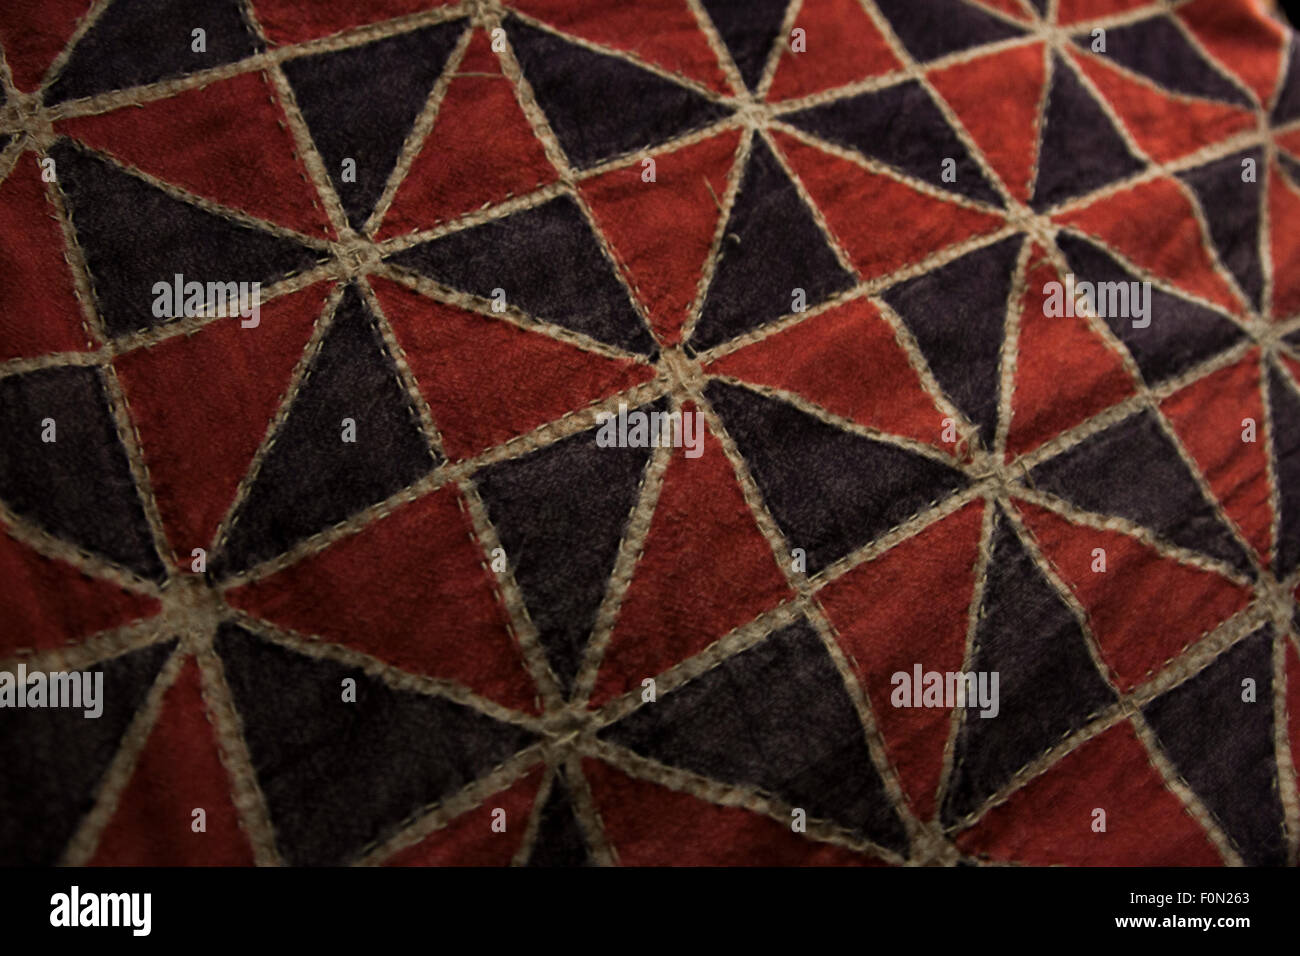 Pinwheel pattern in red and black on an Indian bedspread. Stock Photo